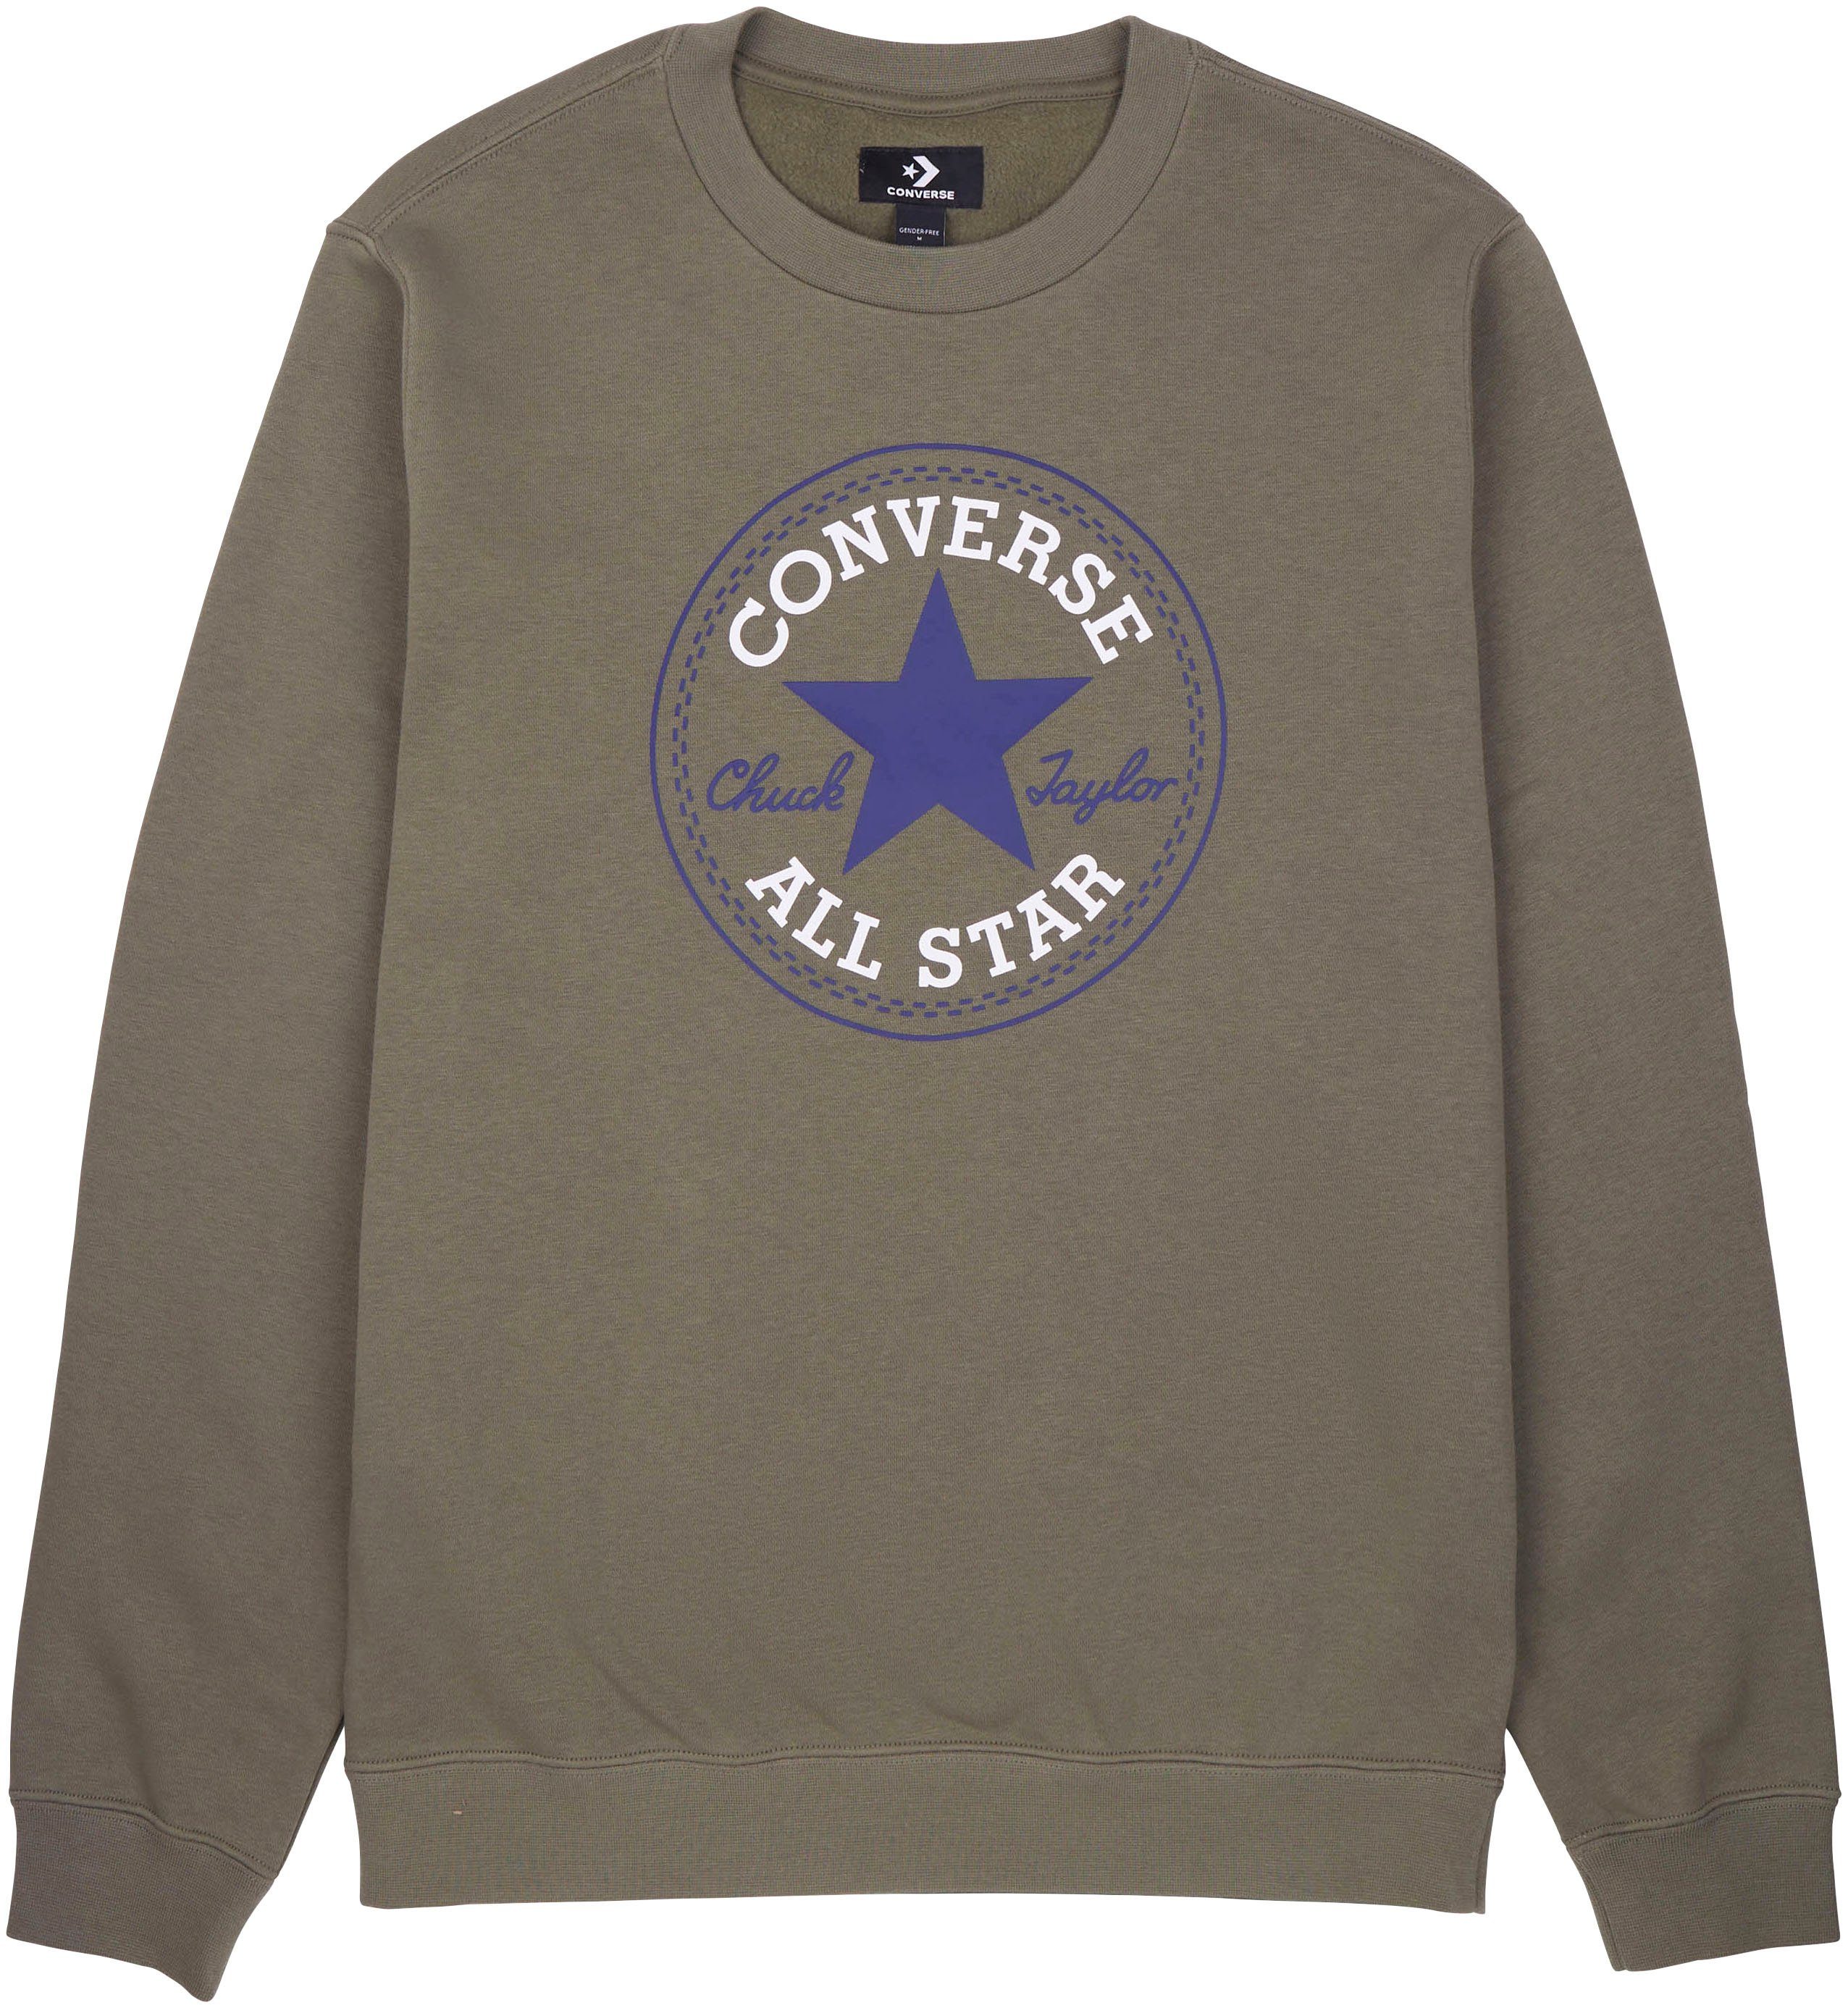 Converse Sweatshirt UNISEX ALL STAR BRUSHED PATCH BACK olive